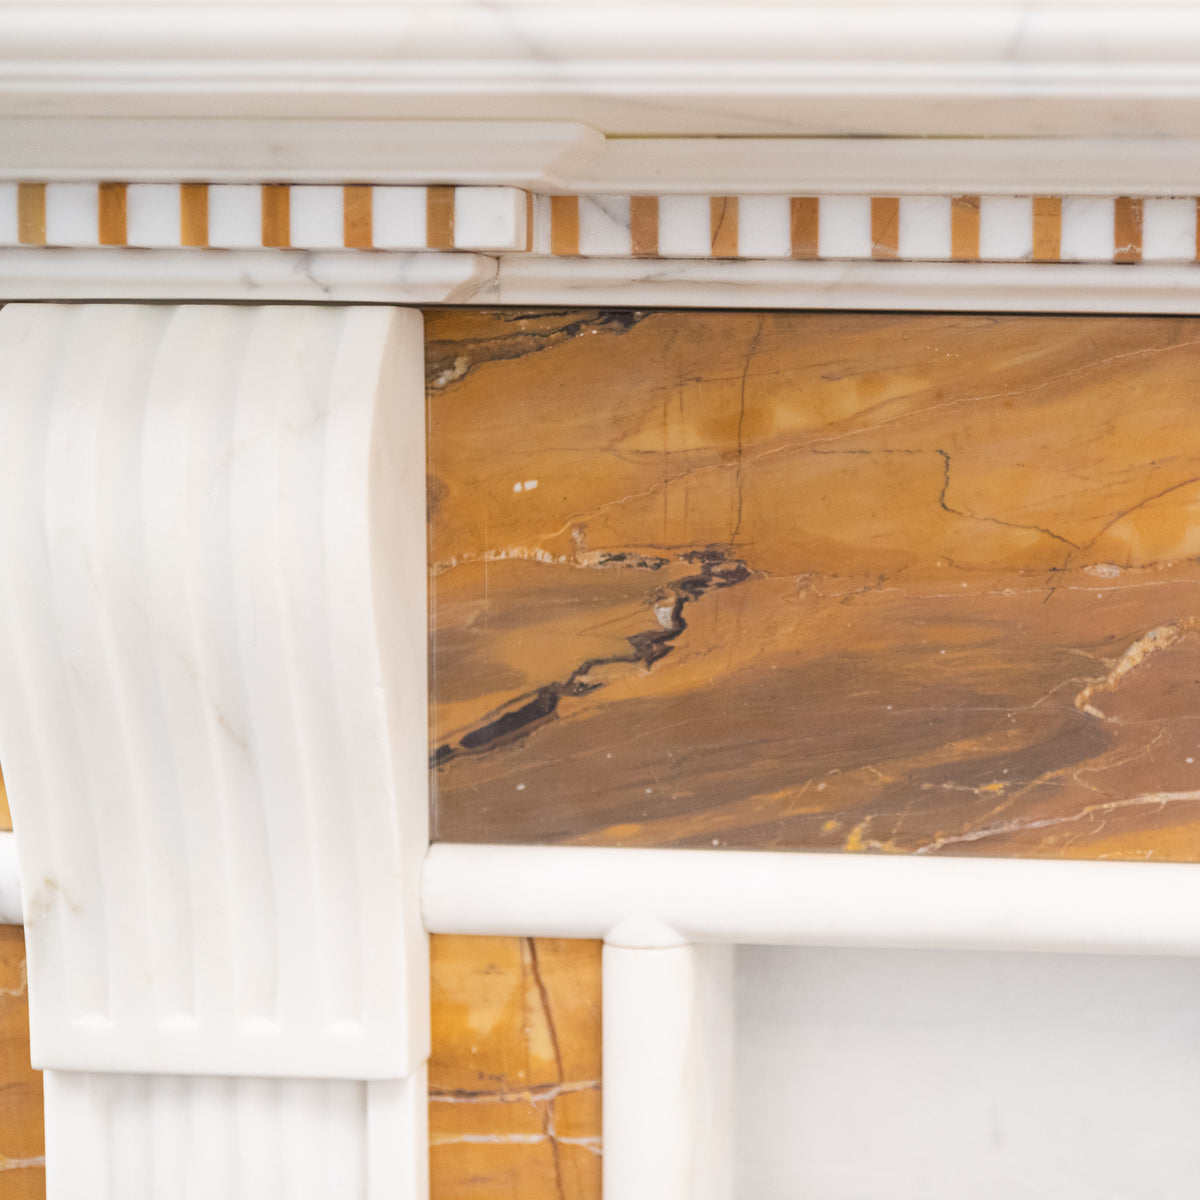 Impressive Georgian Style Statuary &amp; Sienna Marble Chimneypiece | The Architectural Forum